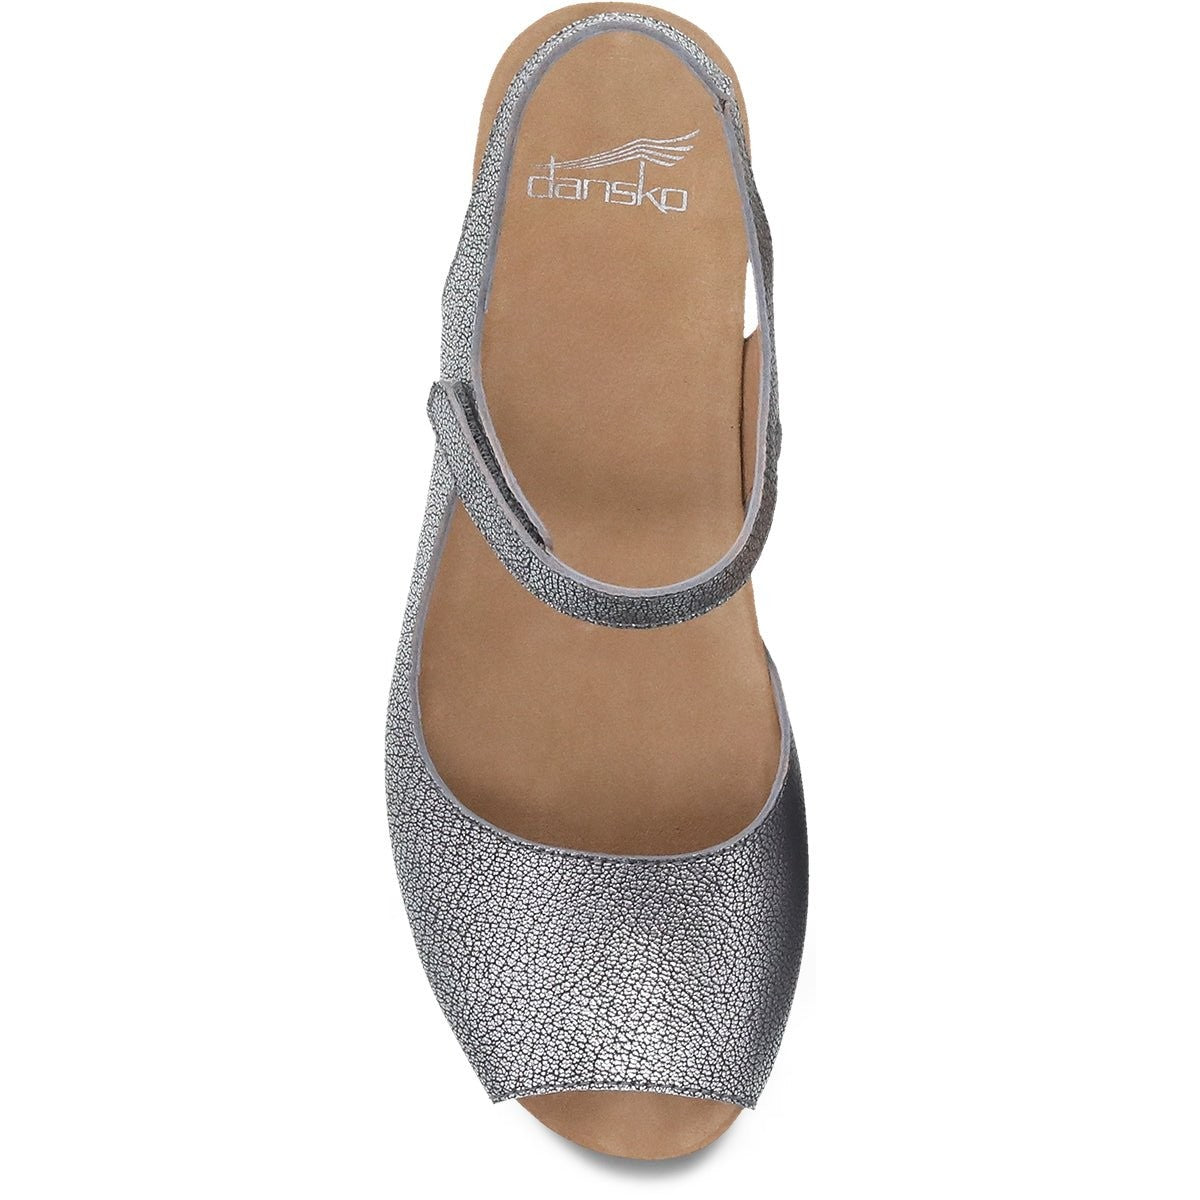 Marcy | Metallic Leather | Pewter